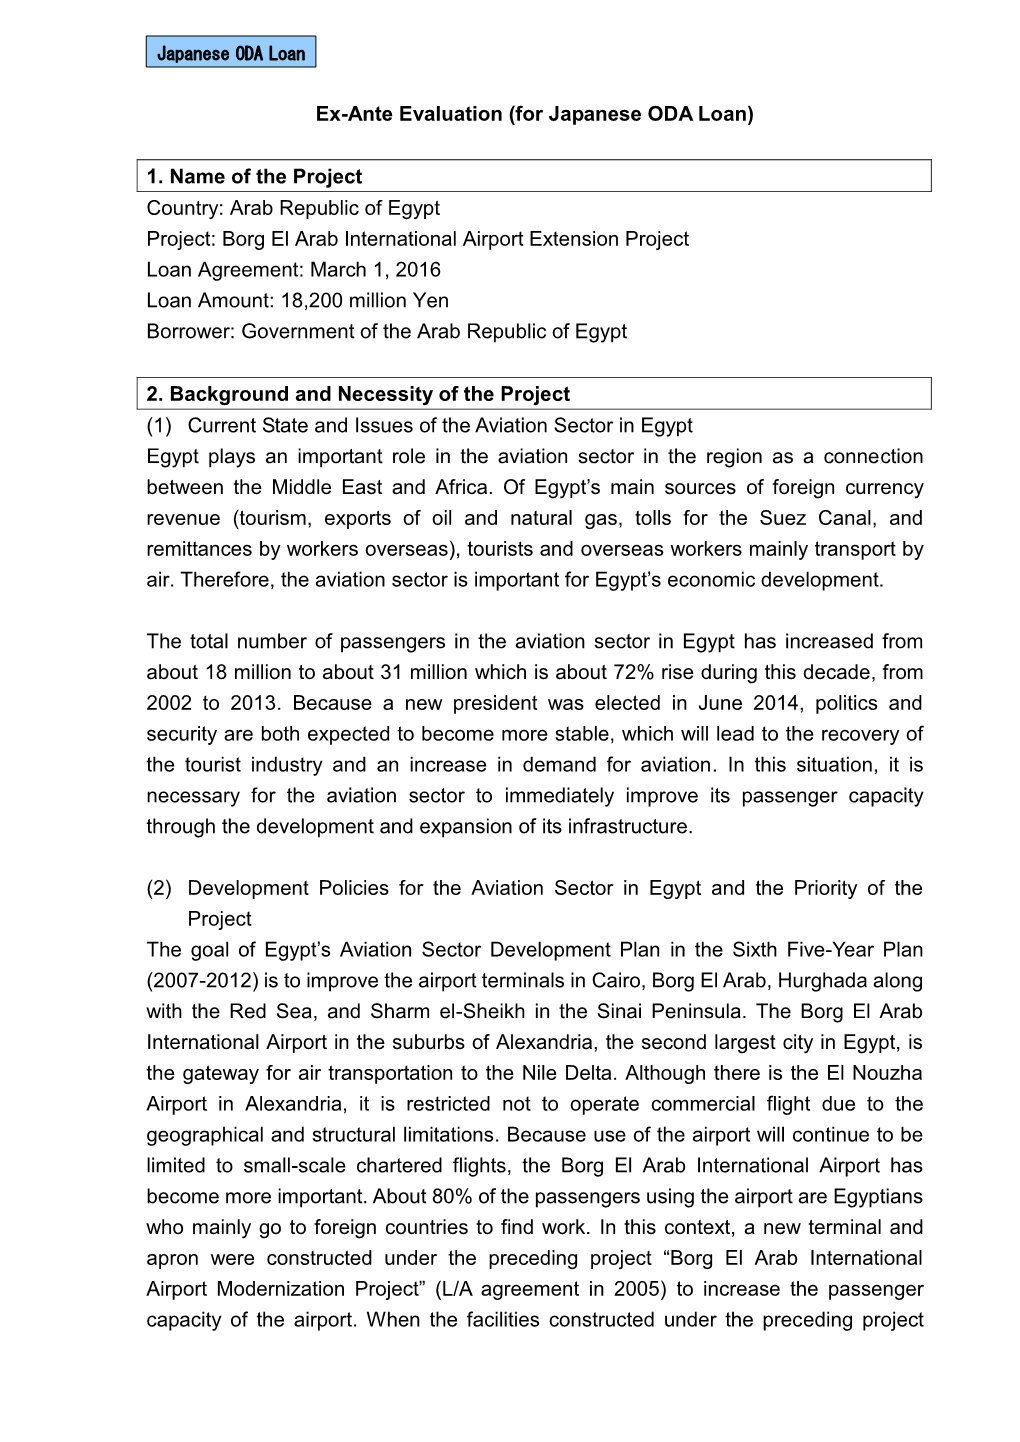 Borg El Arab International Airport Extension Project Loan Agreement: March 1, 2016 Loan Amount: 18,200 Million Yen Borrower: Government of the Arab Republic of Egypt